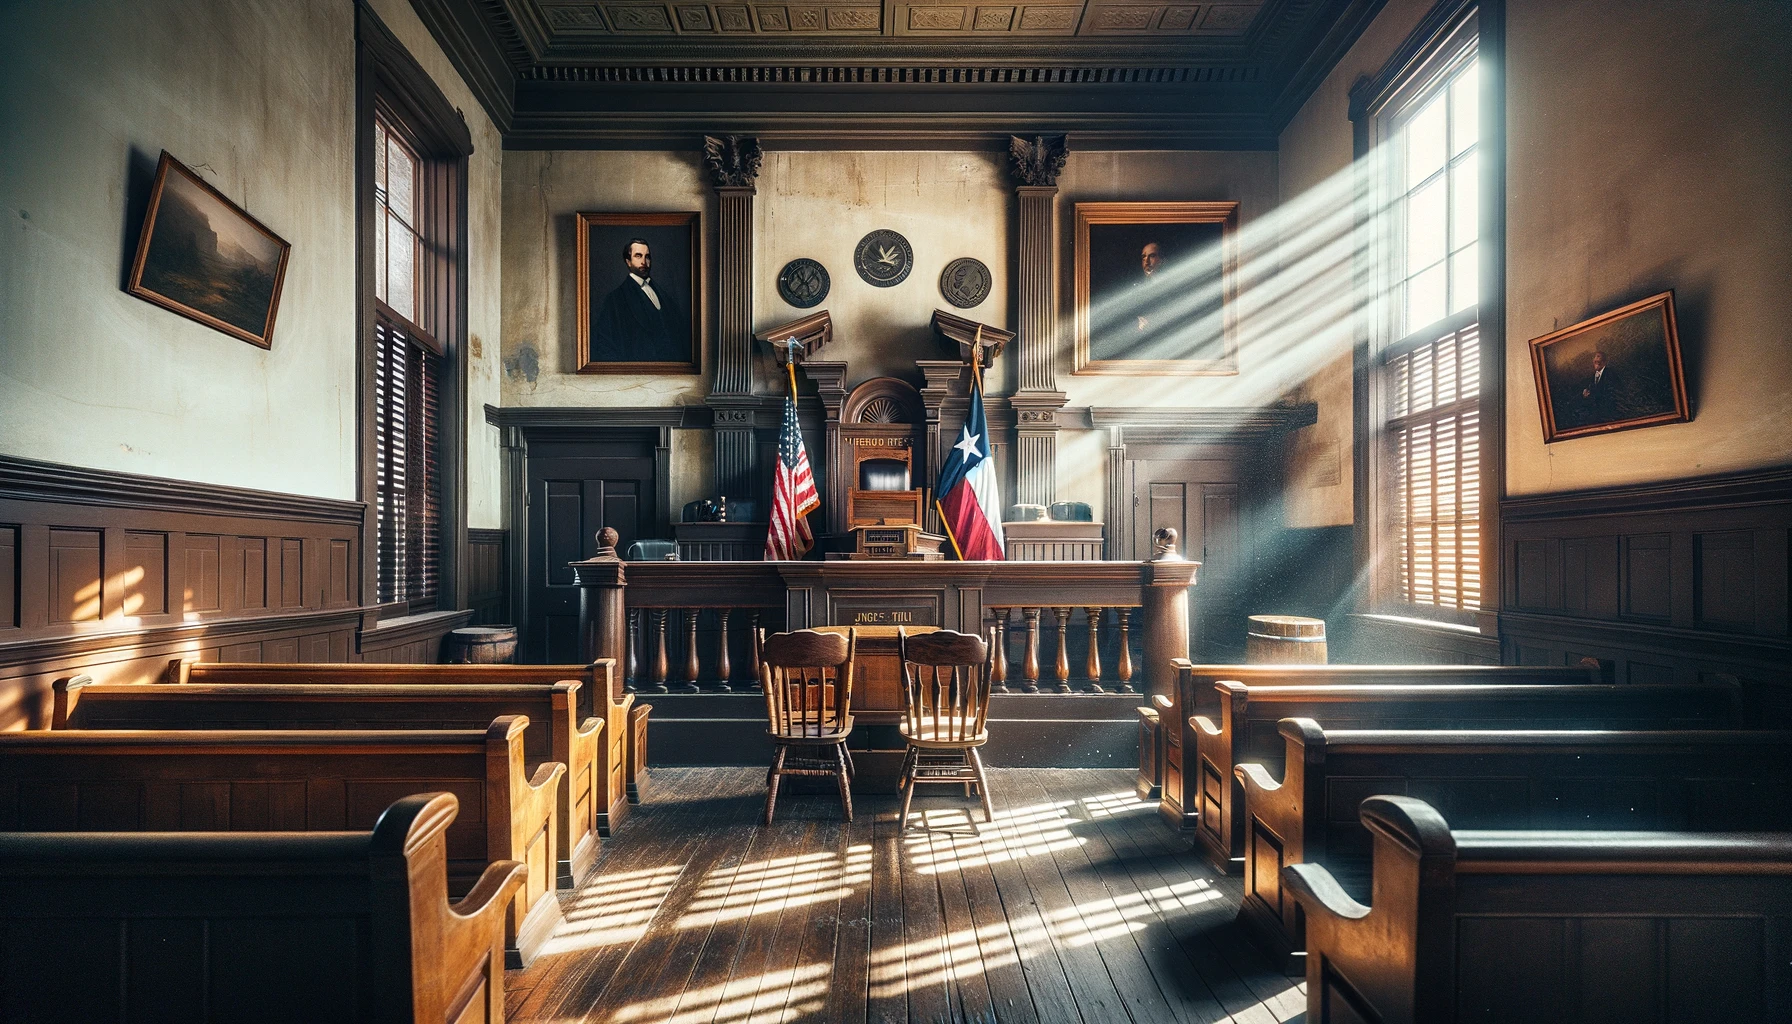 The courtroom is still the best place to challenge the system.